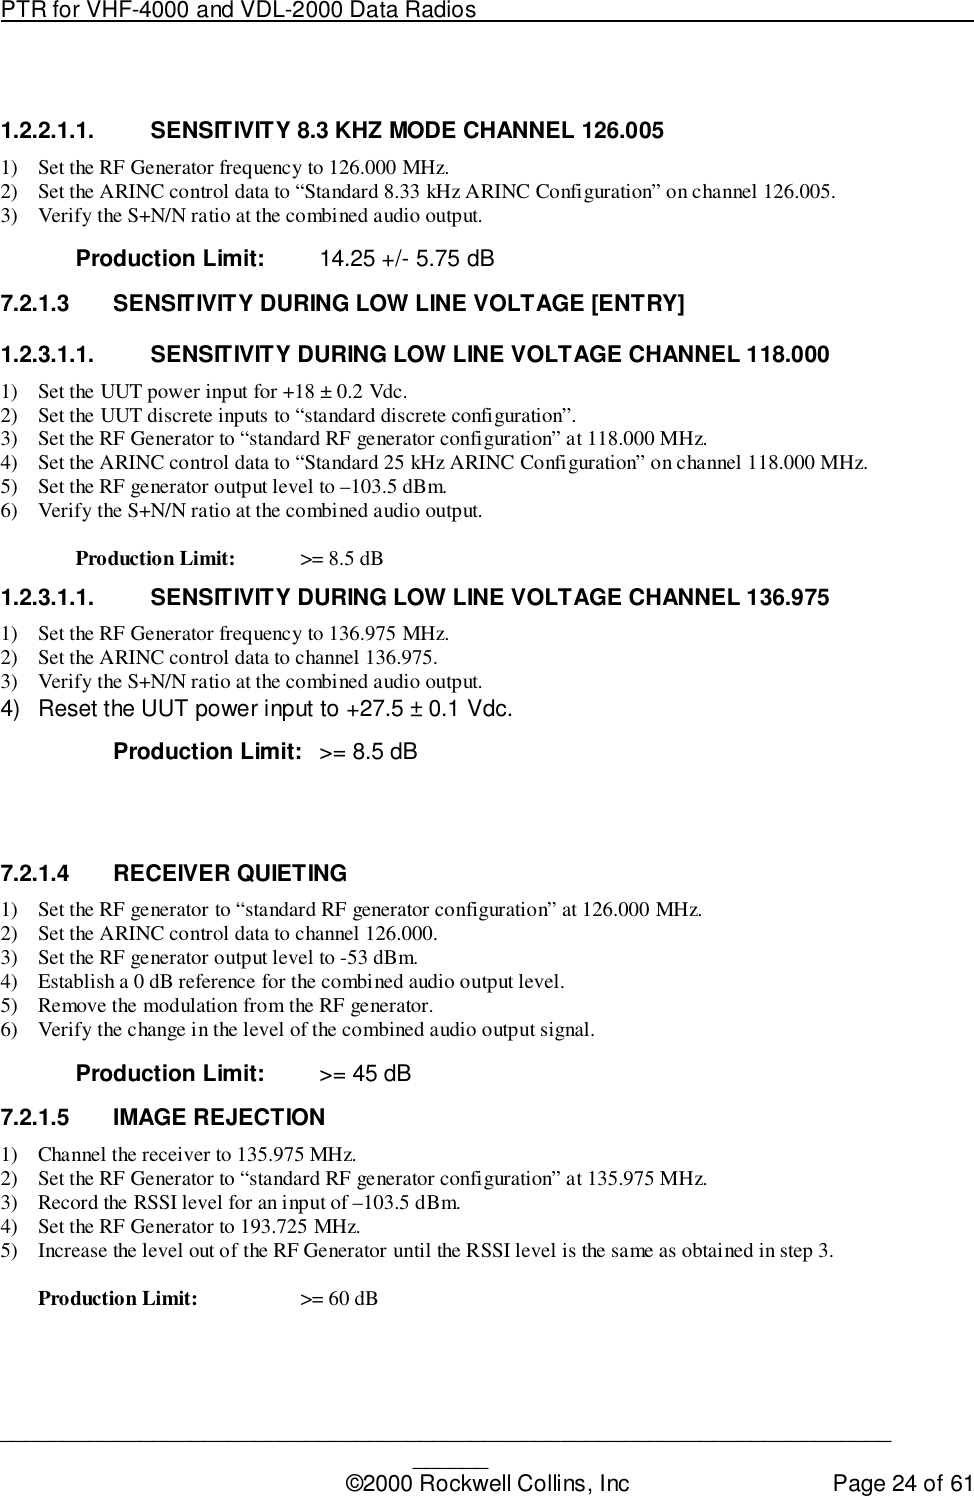 PTR for VHF-4000 and VDL-2000 Data Radios                                                                                ____________________________________________________________________________©2000 Rockwell Collins, Inc Page 24 of 611.2.2.1.1.  SENSITIVITY 8.3 KHZ MODE CHANNEL 126.0051) Set the RF Generator frequency to 126.000 MHz.2) Set the ARINC control data to “Standard 8.33 kHz ARINC Configuration” on channel 126.005.3) Verify the S+N/N ratio at the combined audio output.Production Limit: 14.25 +/- 5.75 dB7.2.1.3  SENSITIVITY DURING LOW LINE VOLTAGE [ENTRY]1.2.3.1.1.  SENSITIVITY DURING LOW LINE VOLTAGE CHANNEL 118.0001) Set the UUT power input for +18 ± 0.2 Vdc.2) Set the UUT discrete inputs to “standard discrete configuration”.3) Set the RF Generator to “standard RF generator configuration” at 118.000 MHz.4) Set the ARINC control data to “Standard 25 kHz ARINC Configuration” on channel 118.000 MHz.5) Set the RF generator output level to –103.5 dBm.6) Verify the S+N/N ratio at the combined audio output.Production Limit: &gt;= 8.5 dB1.2.3.1.1.  SENSITIVITY DURING LOW LINE VOLTAGE CHANNEL 136.9751) Set the RF Generator frequency to 136.975 MHz.2) Set the ARINC control data to channel 136.975.3) Verify the S+N/N ratio at the combined audio output.4)  Reset the UUT power input to +27.5 ± 0.1 Vdc.Production Limit: &gt;= 8.5 dB7.2.1.4 RECEIVER QUIETING1) Set the RF generator to “standard RF generator configuration” at 126.000 MHz.2) Set the ARINC control data to channel 126.000.3) Set the RF generator output level to -53 dBm.4) Establish a 0 dB reference for the combined audio output level.5) Remove the modulation from the RF generator.6) Verify the change in the level of the combined audio output signal.Production Limit: &gt;= 45 dB7.2.1.5 IMAGE REJECTION1) Channel the receiver to 135.975 MHz.2) Set the RF Generator to “standard RF generator configuration” at 135.975 MHz.3) Record the RSSI level for an input of –103.5 dBm.4) Set the RF Generator to 193.725 MHz.5) Increase the level out of the RF Generator until the RSSI level is the same as obtained in step 3.Production Limit: &gt;= 60 dB